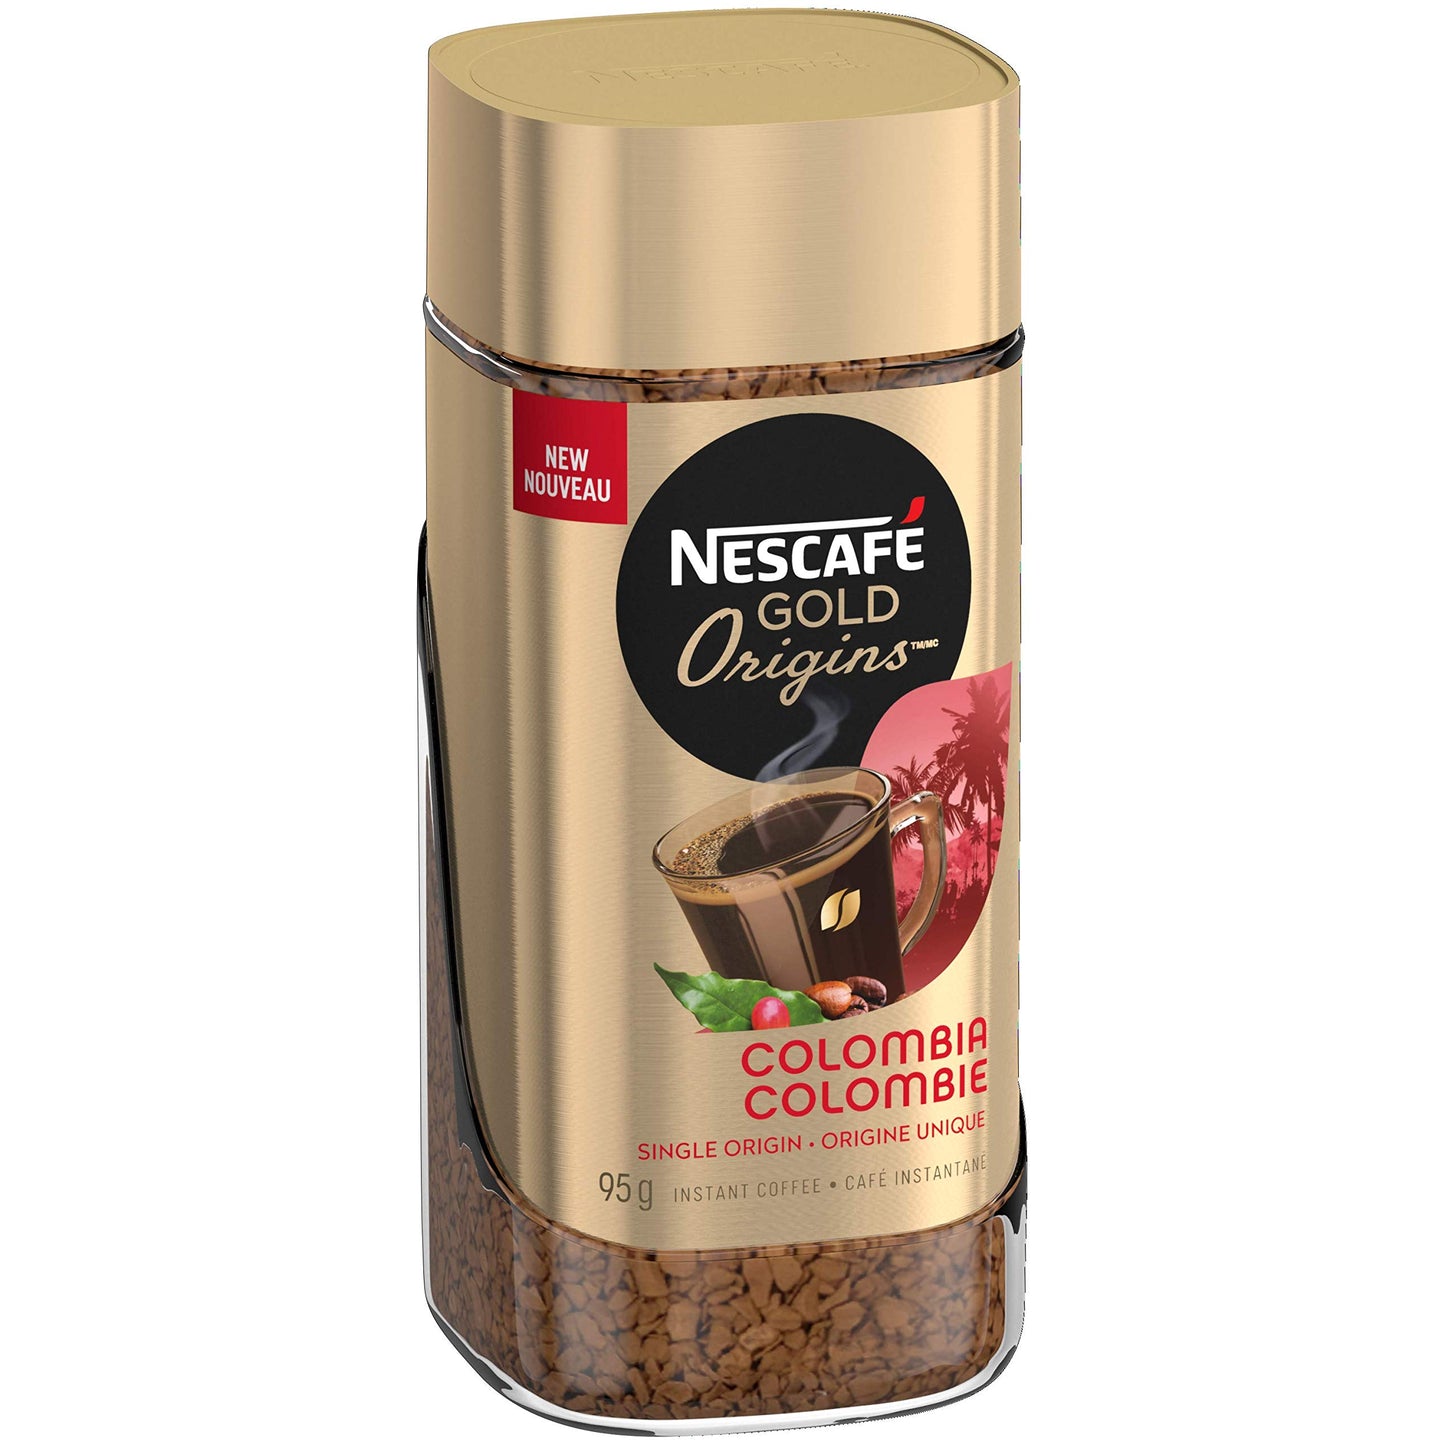 NESCAFE Gold Origins Colombia Coffee Jar 95g/3.4oz (Shipped from Canada)